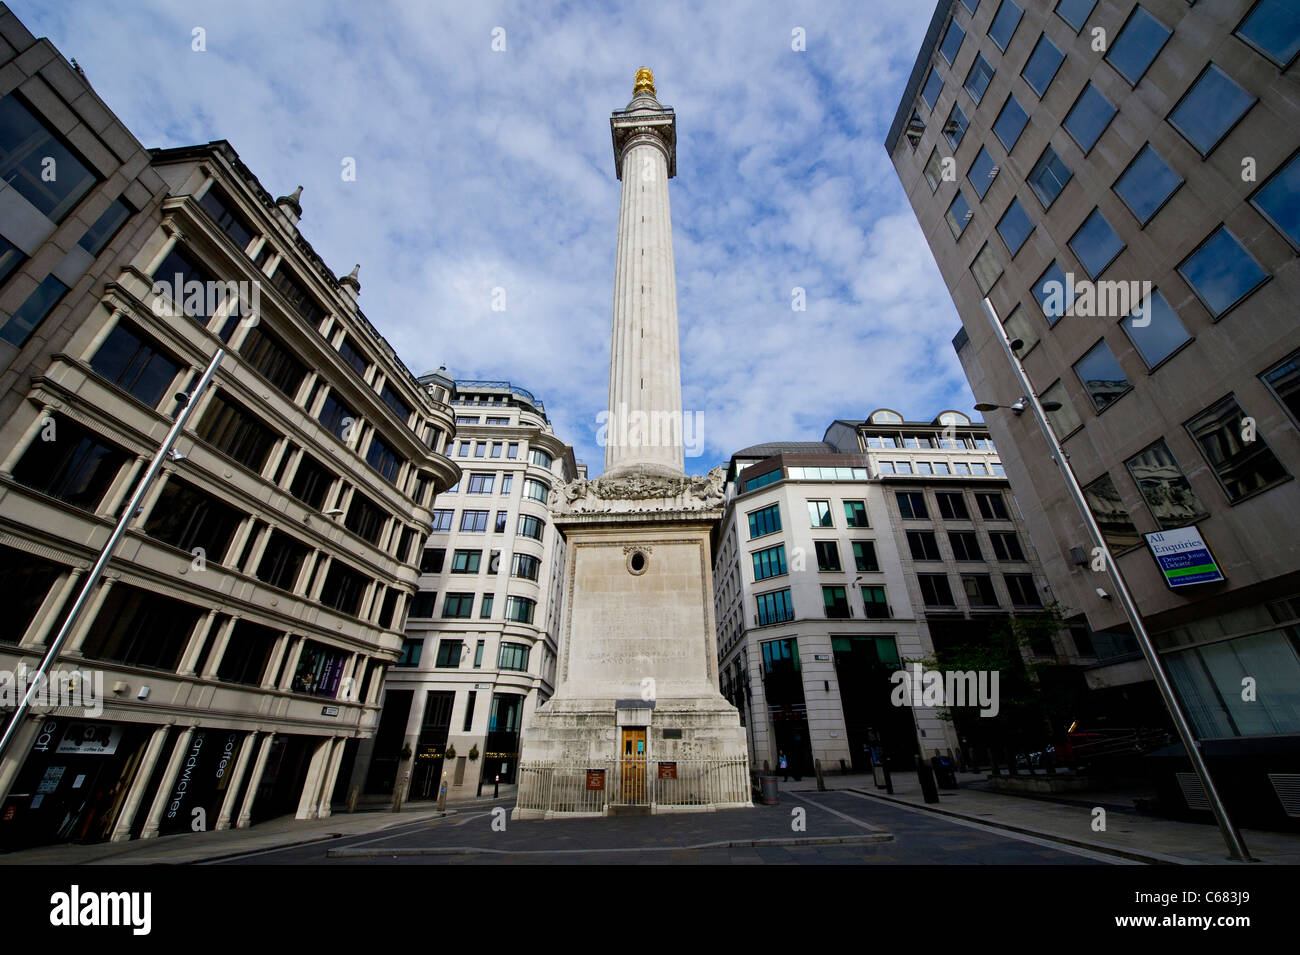 The Monument, erected near Pudding Lane where the Great fire of London in 1666 began, which is now a London tourism attraction Stock Photo